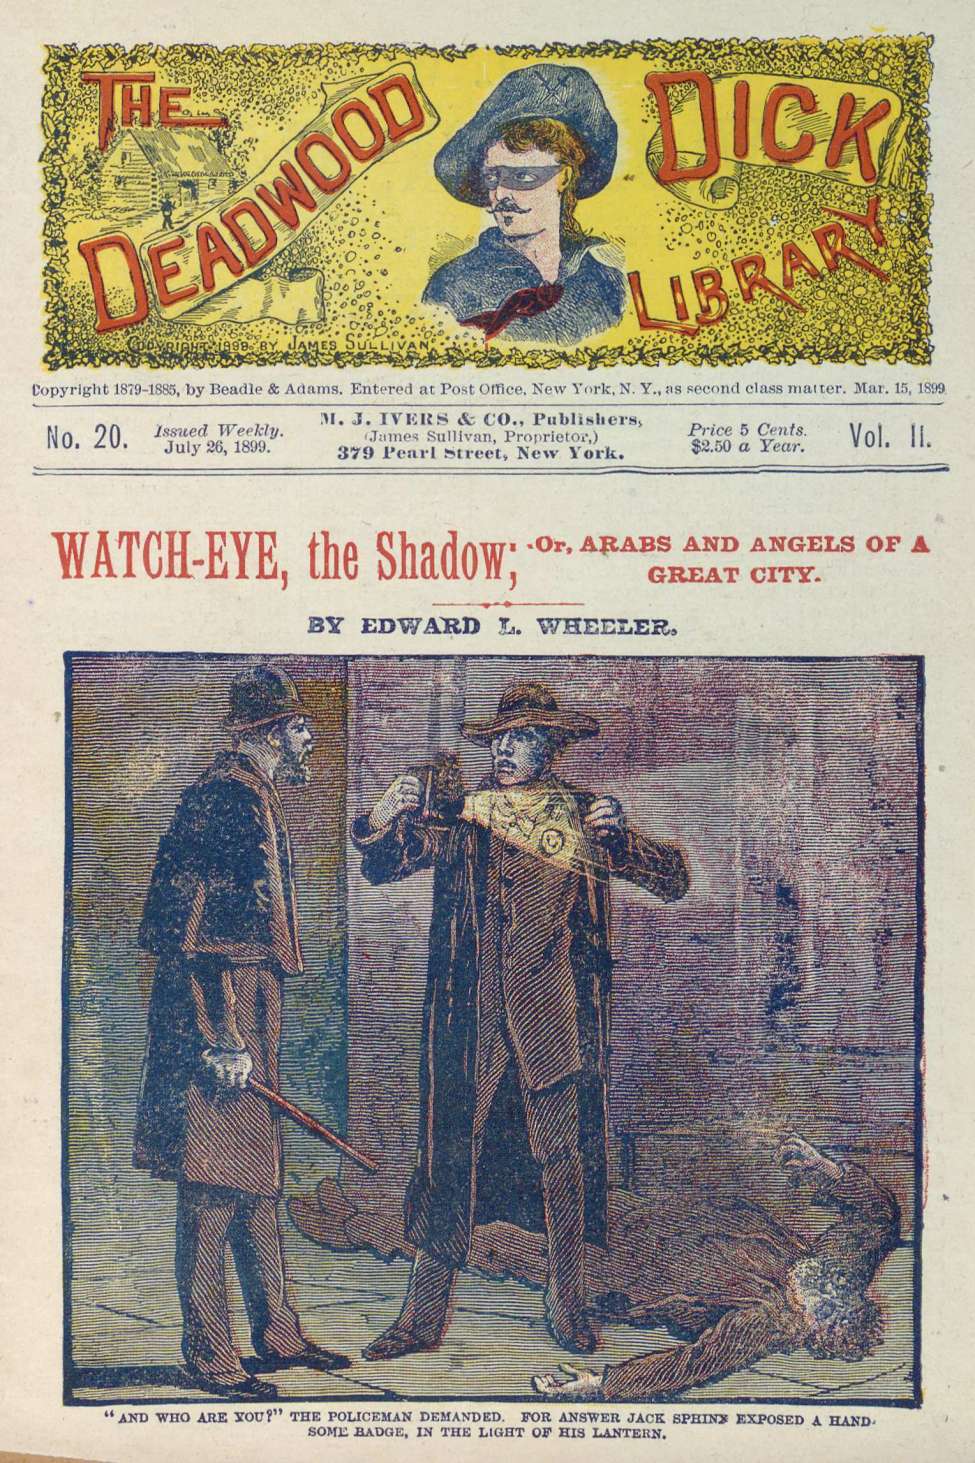 Book Cover For Deadwood Dick Library v2 20 - Watch-Eye, the Shadow